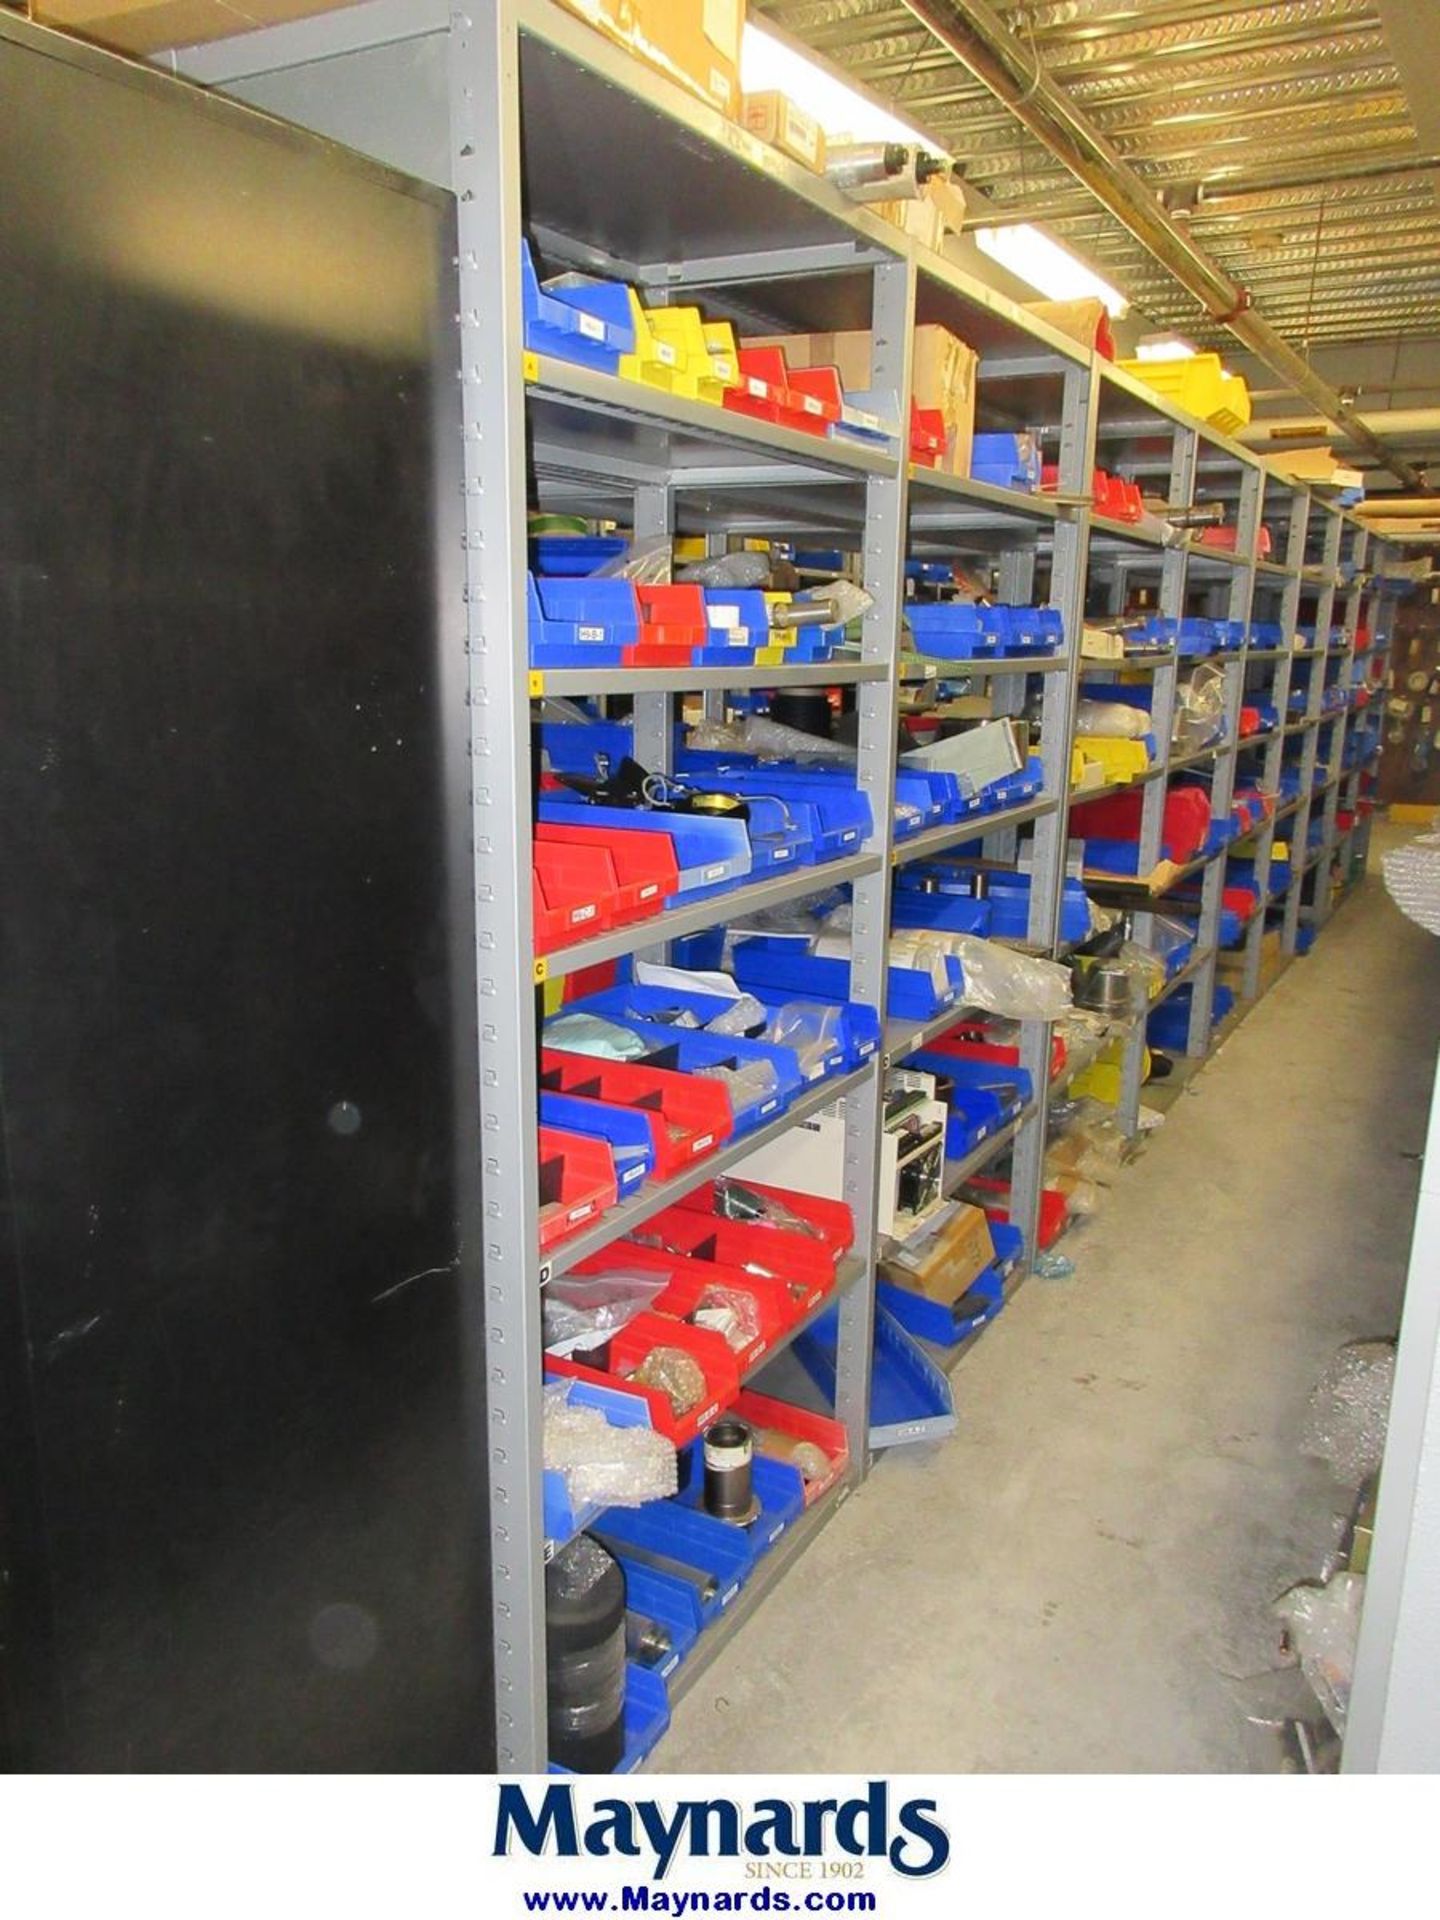 Large Lot of Electrical Controls, PLC's, Drives & Remaining Contents of Maint. Parts Crib - Image 47 of 107